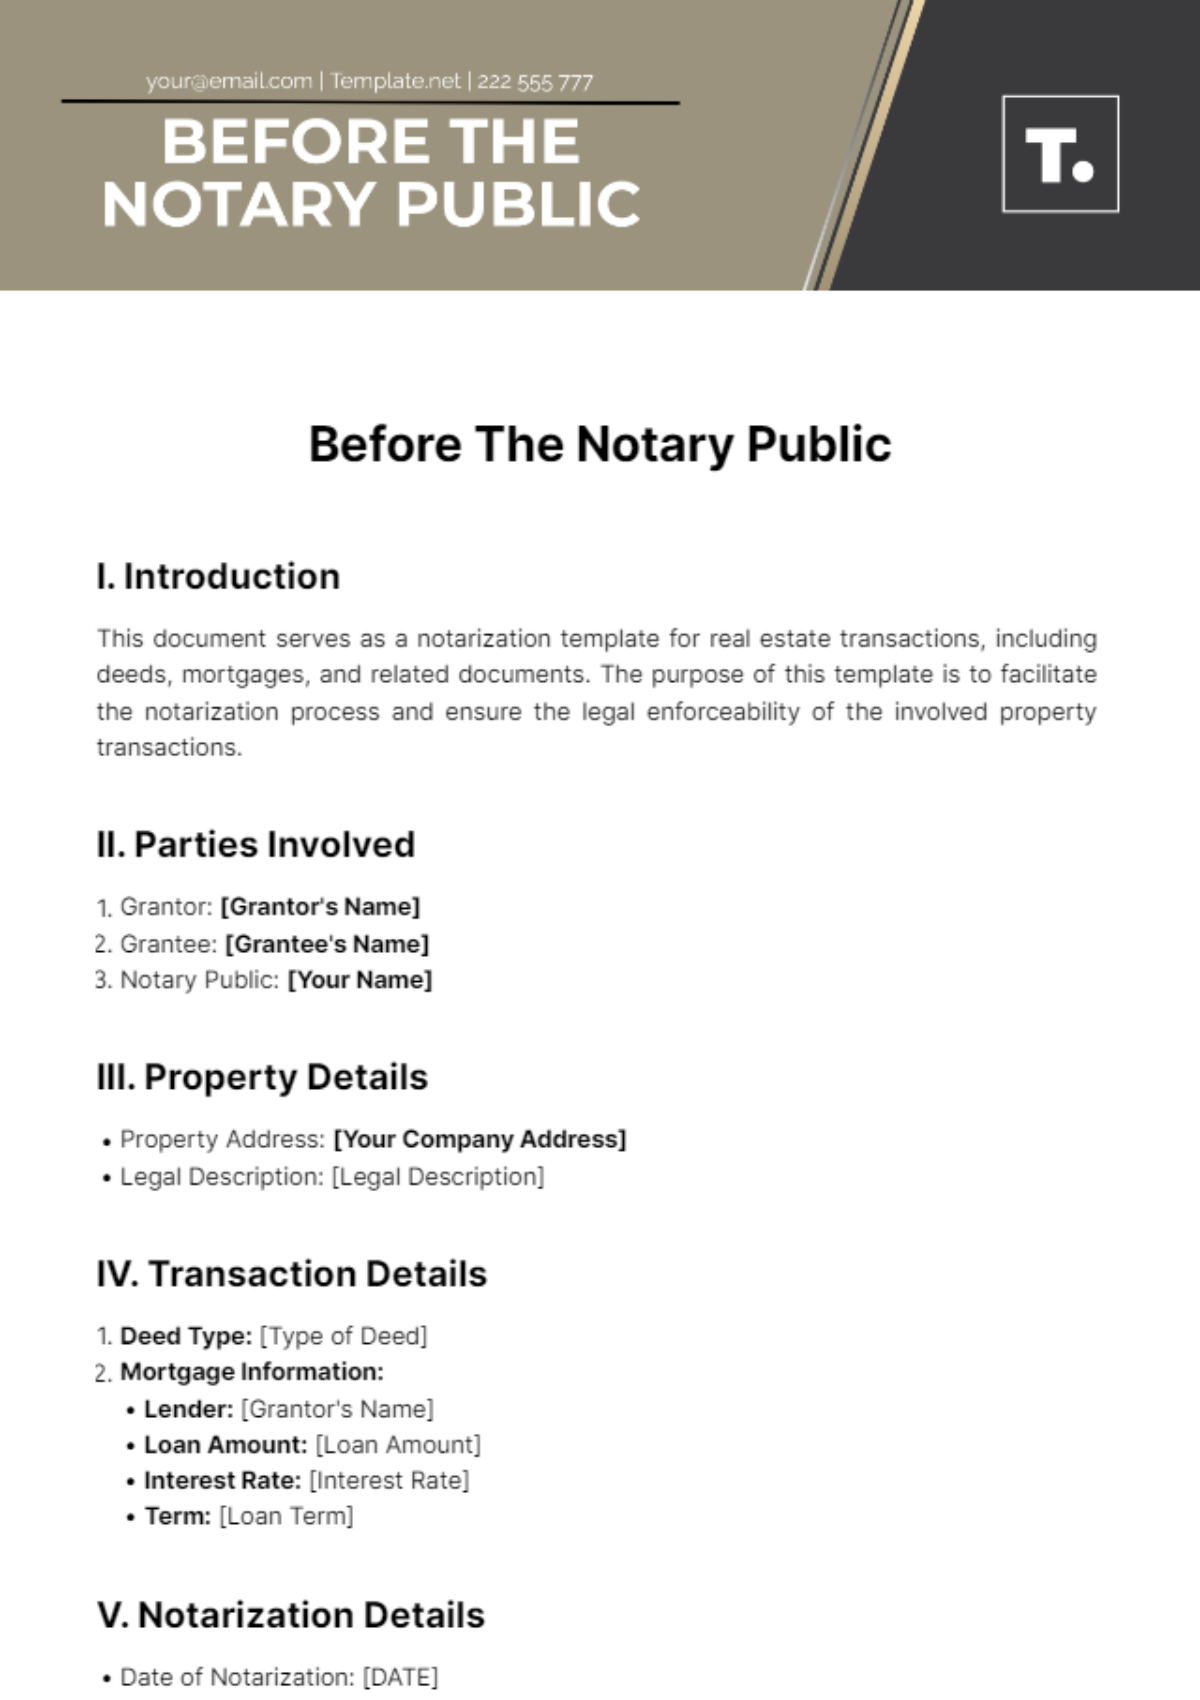 Before The Notary Public Template